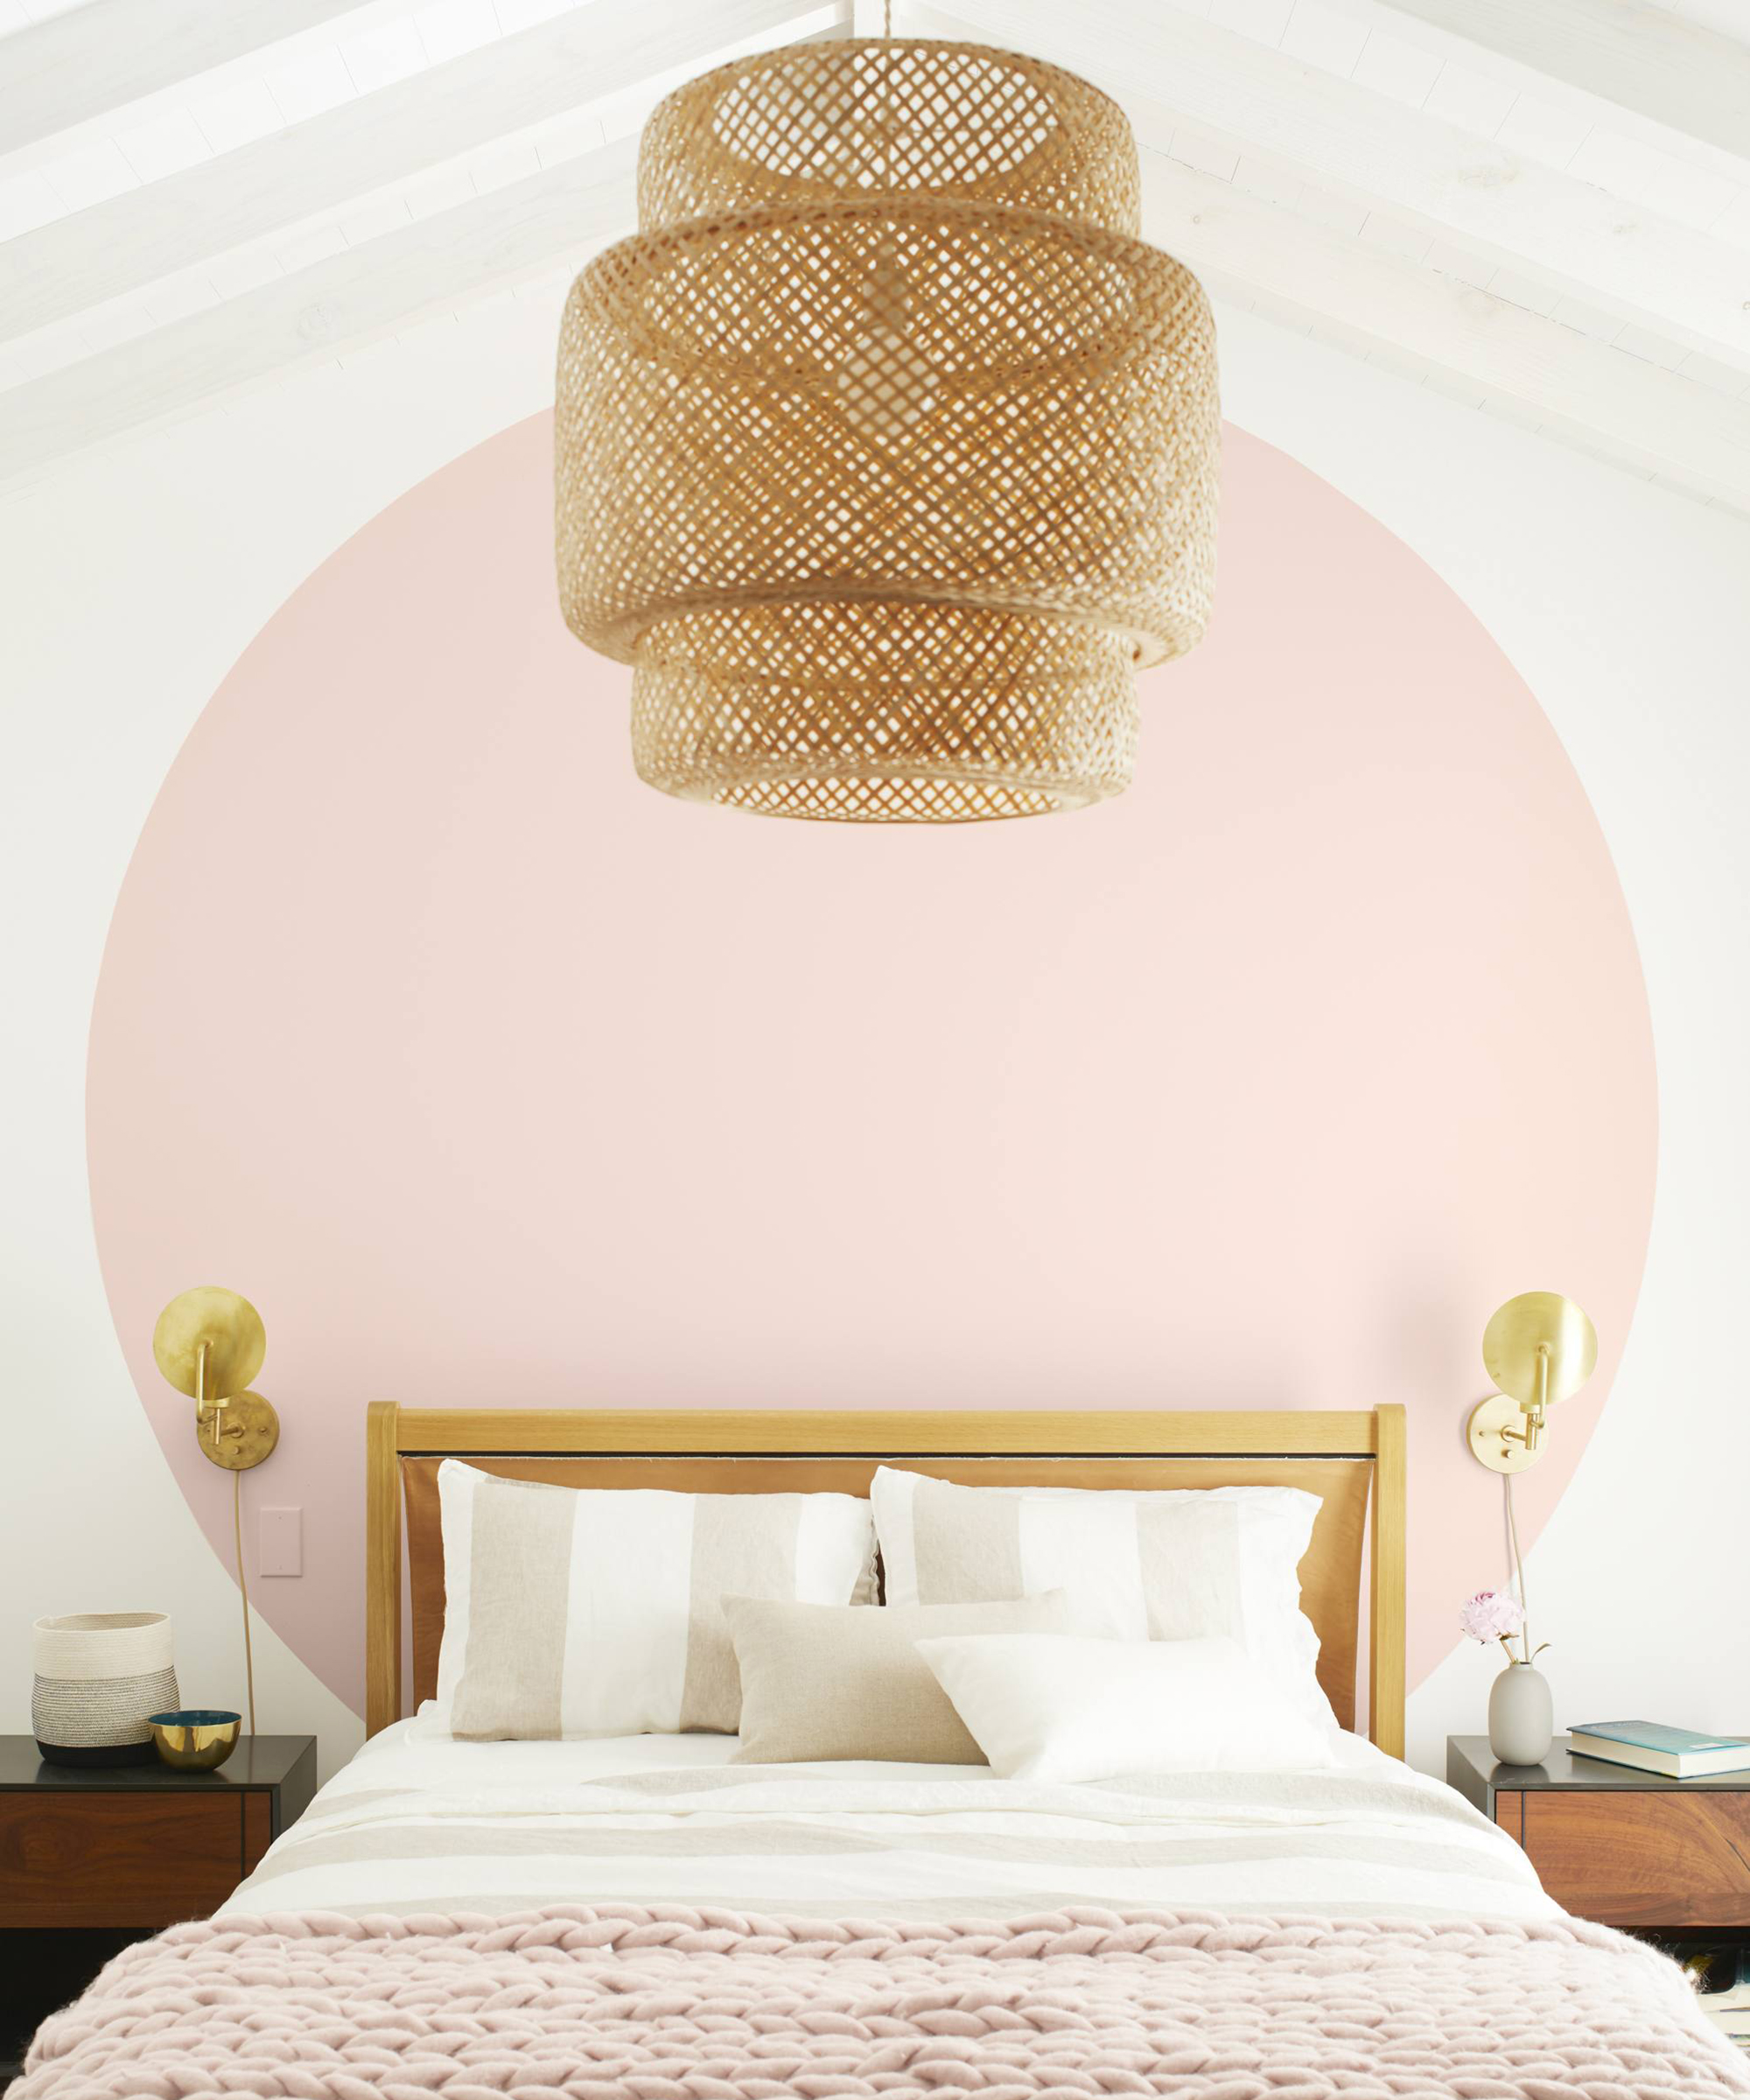 A bedroom using Benjamin Moore Colour Of The Year 2020 First Light 2102 70 Regal Select Matte paints on feature wall and rattan lantern light